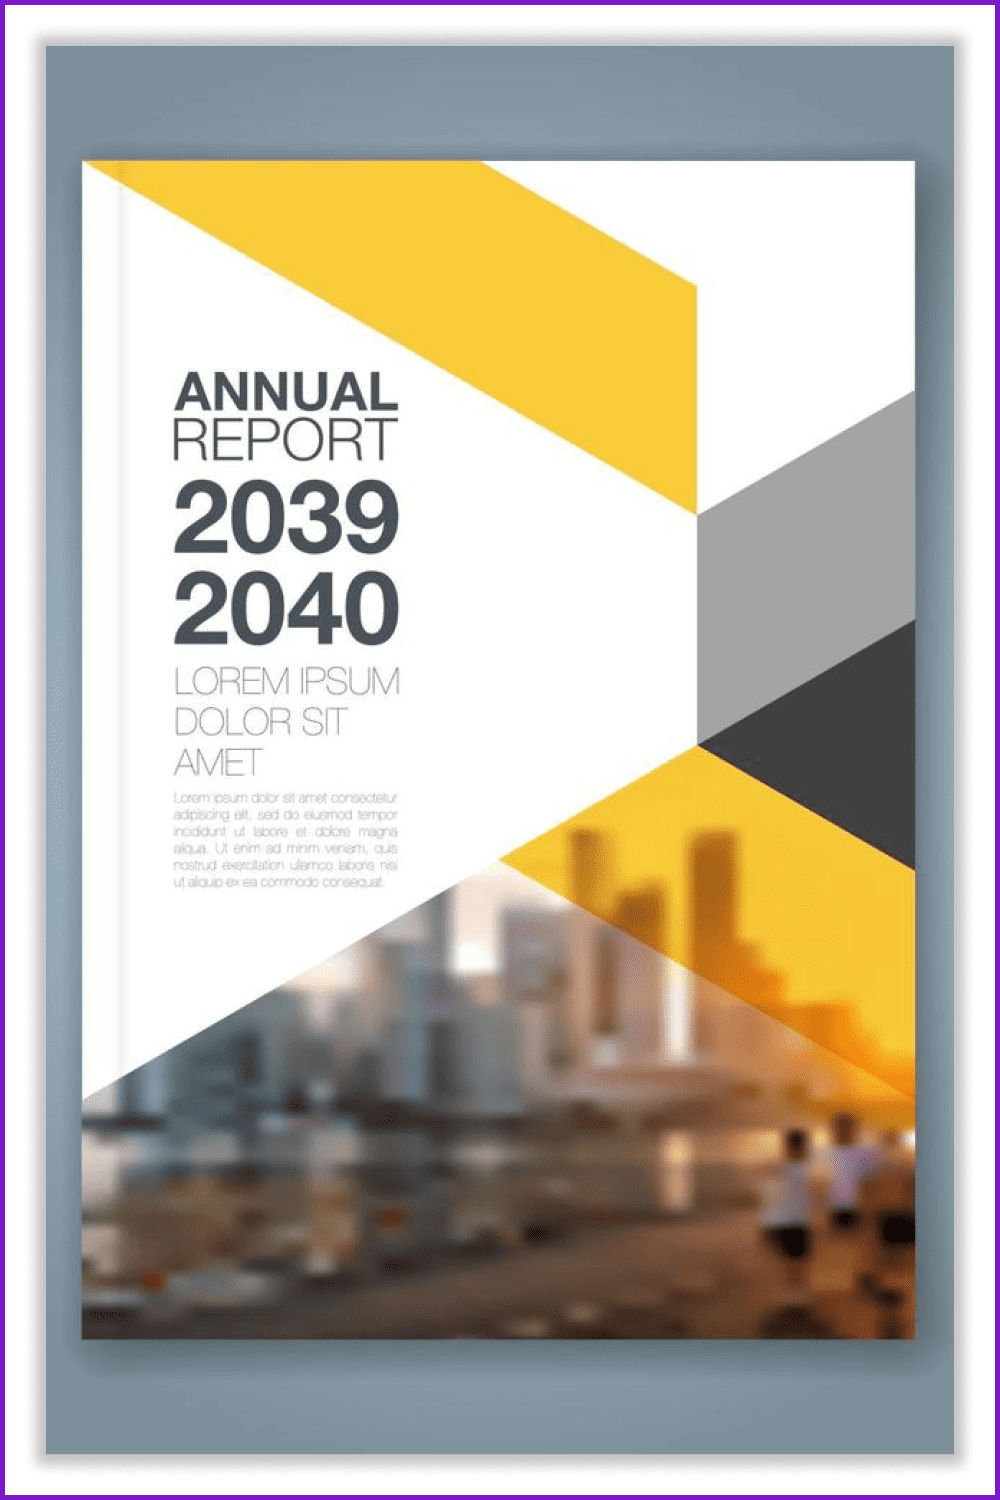 Cover of Annual report with stripes and photo.